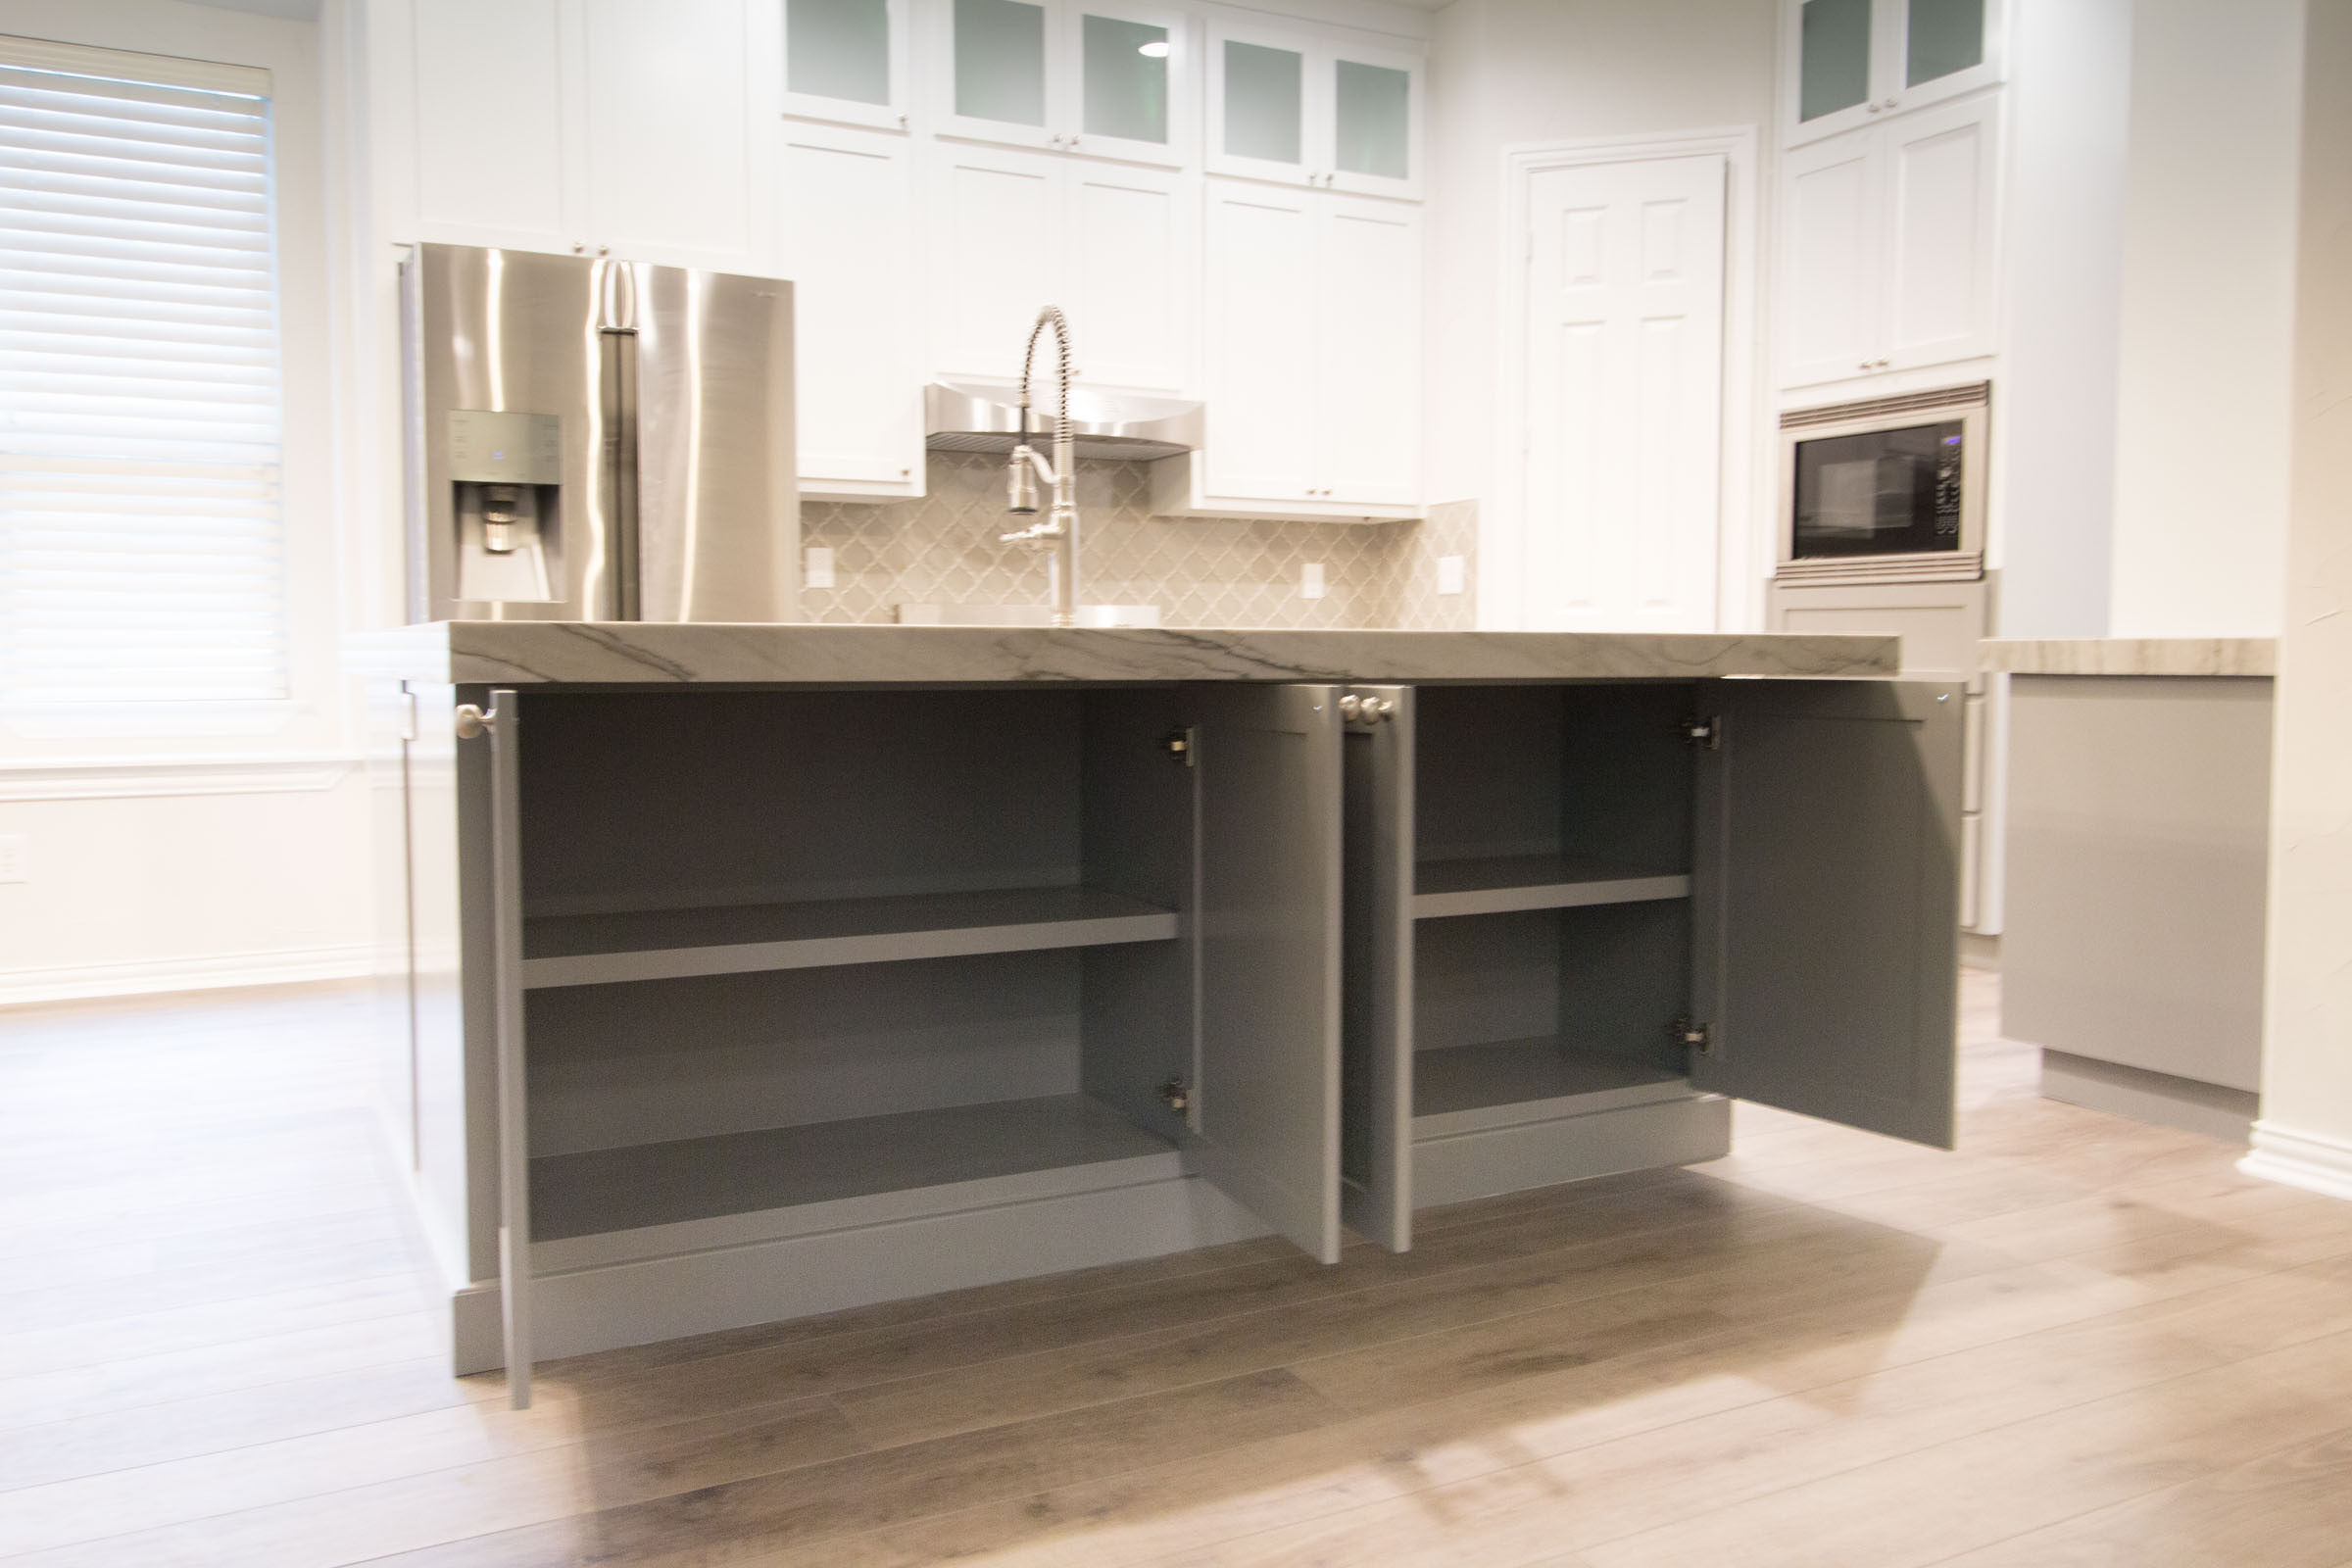 Contemporary kitchen remodel, showcasing under island storage space, open cabinet doors, bar island with sink